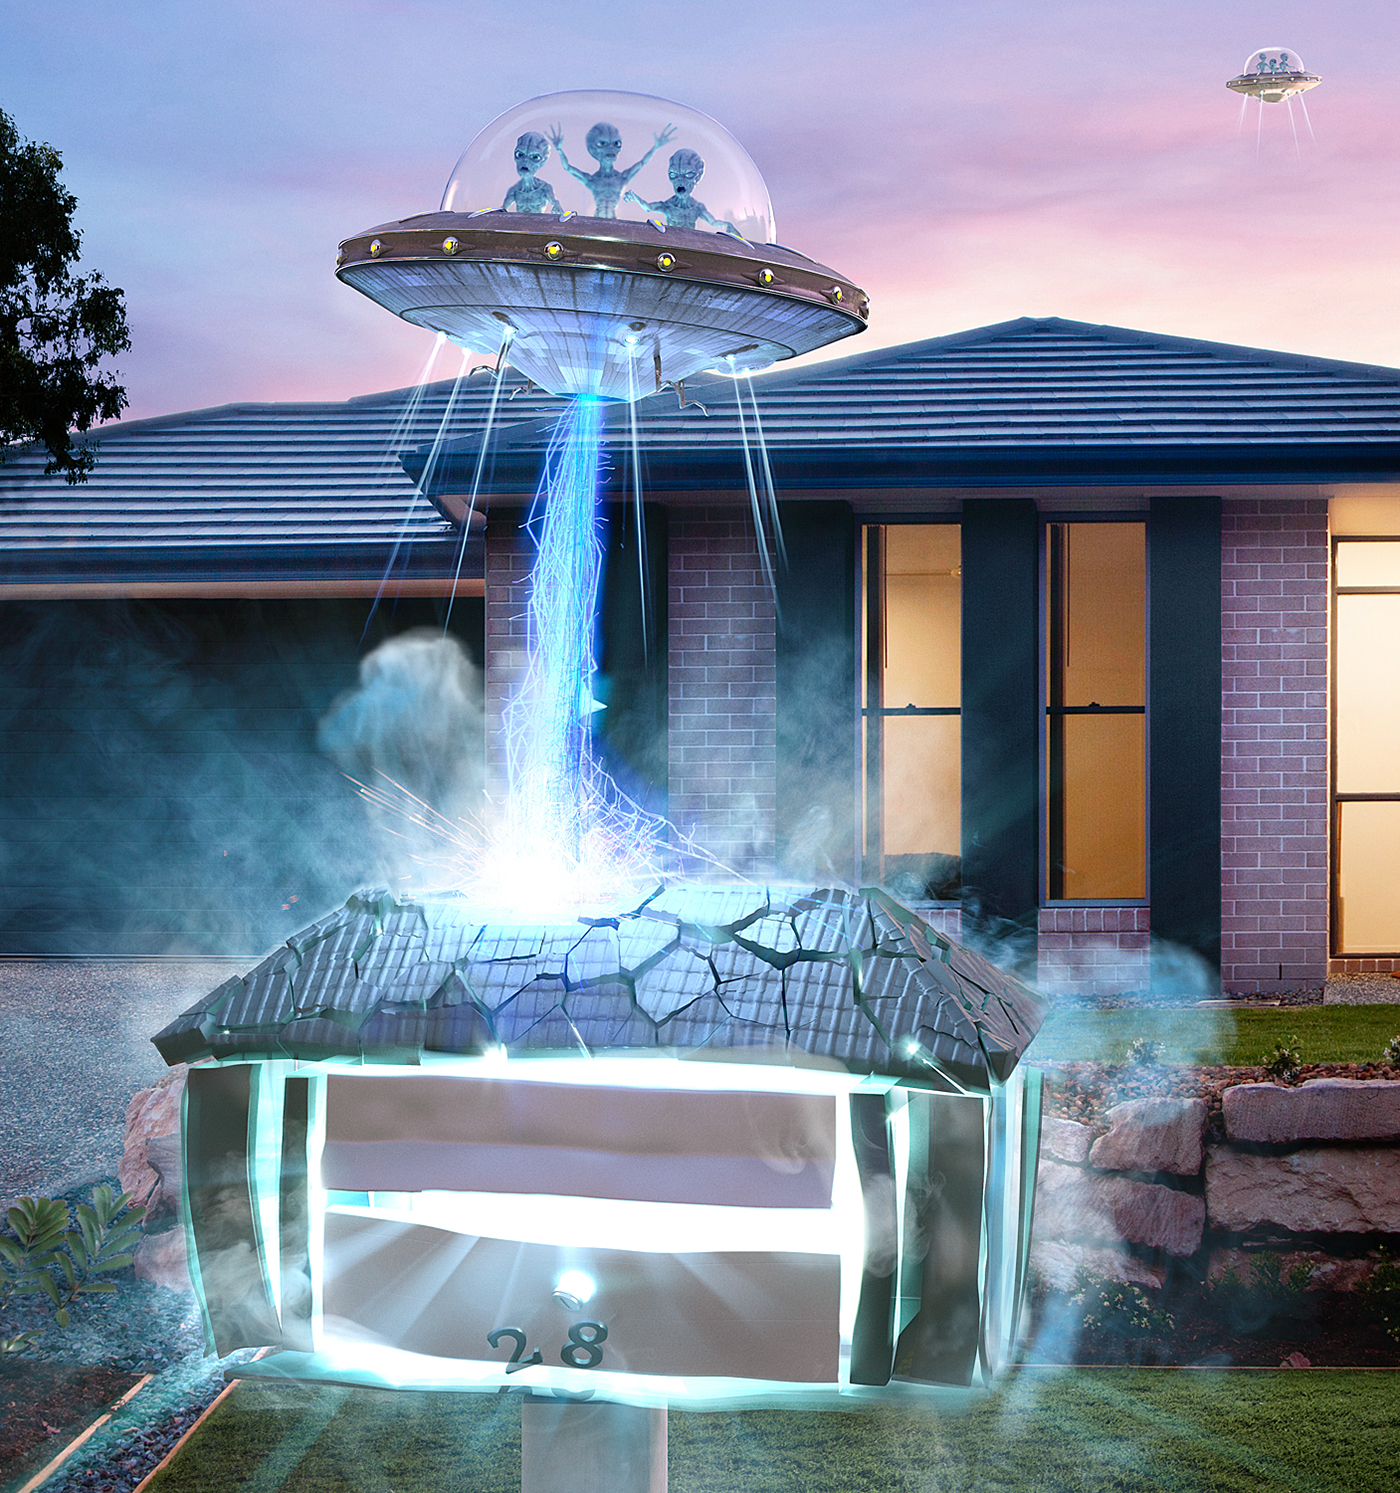 King Kong Electric At ea play god photoshop CGI Alien Invasion aliens space ship gorilla Home Insurance home Australia behind the scenes 3dsmax